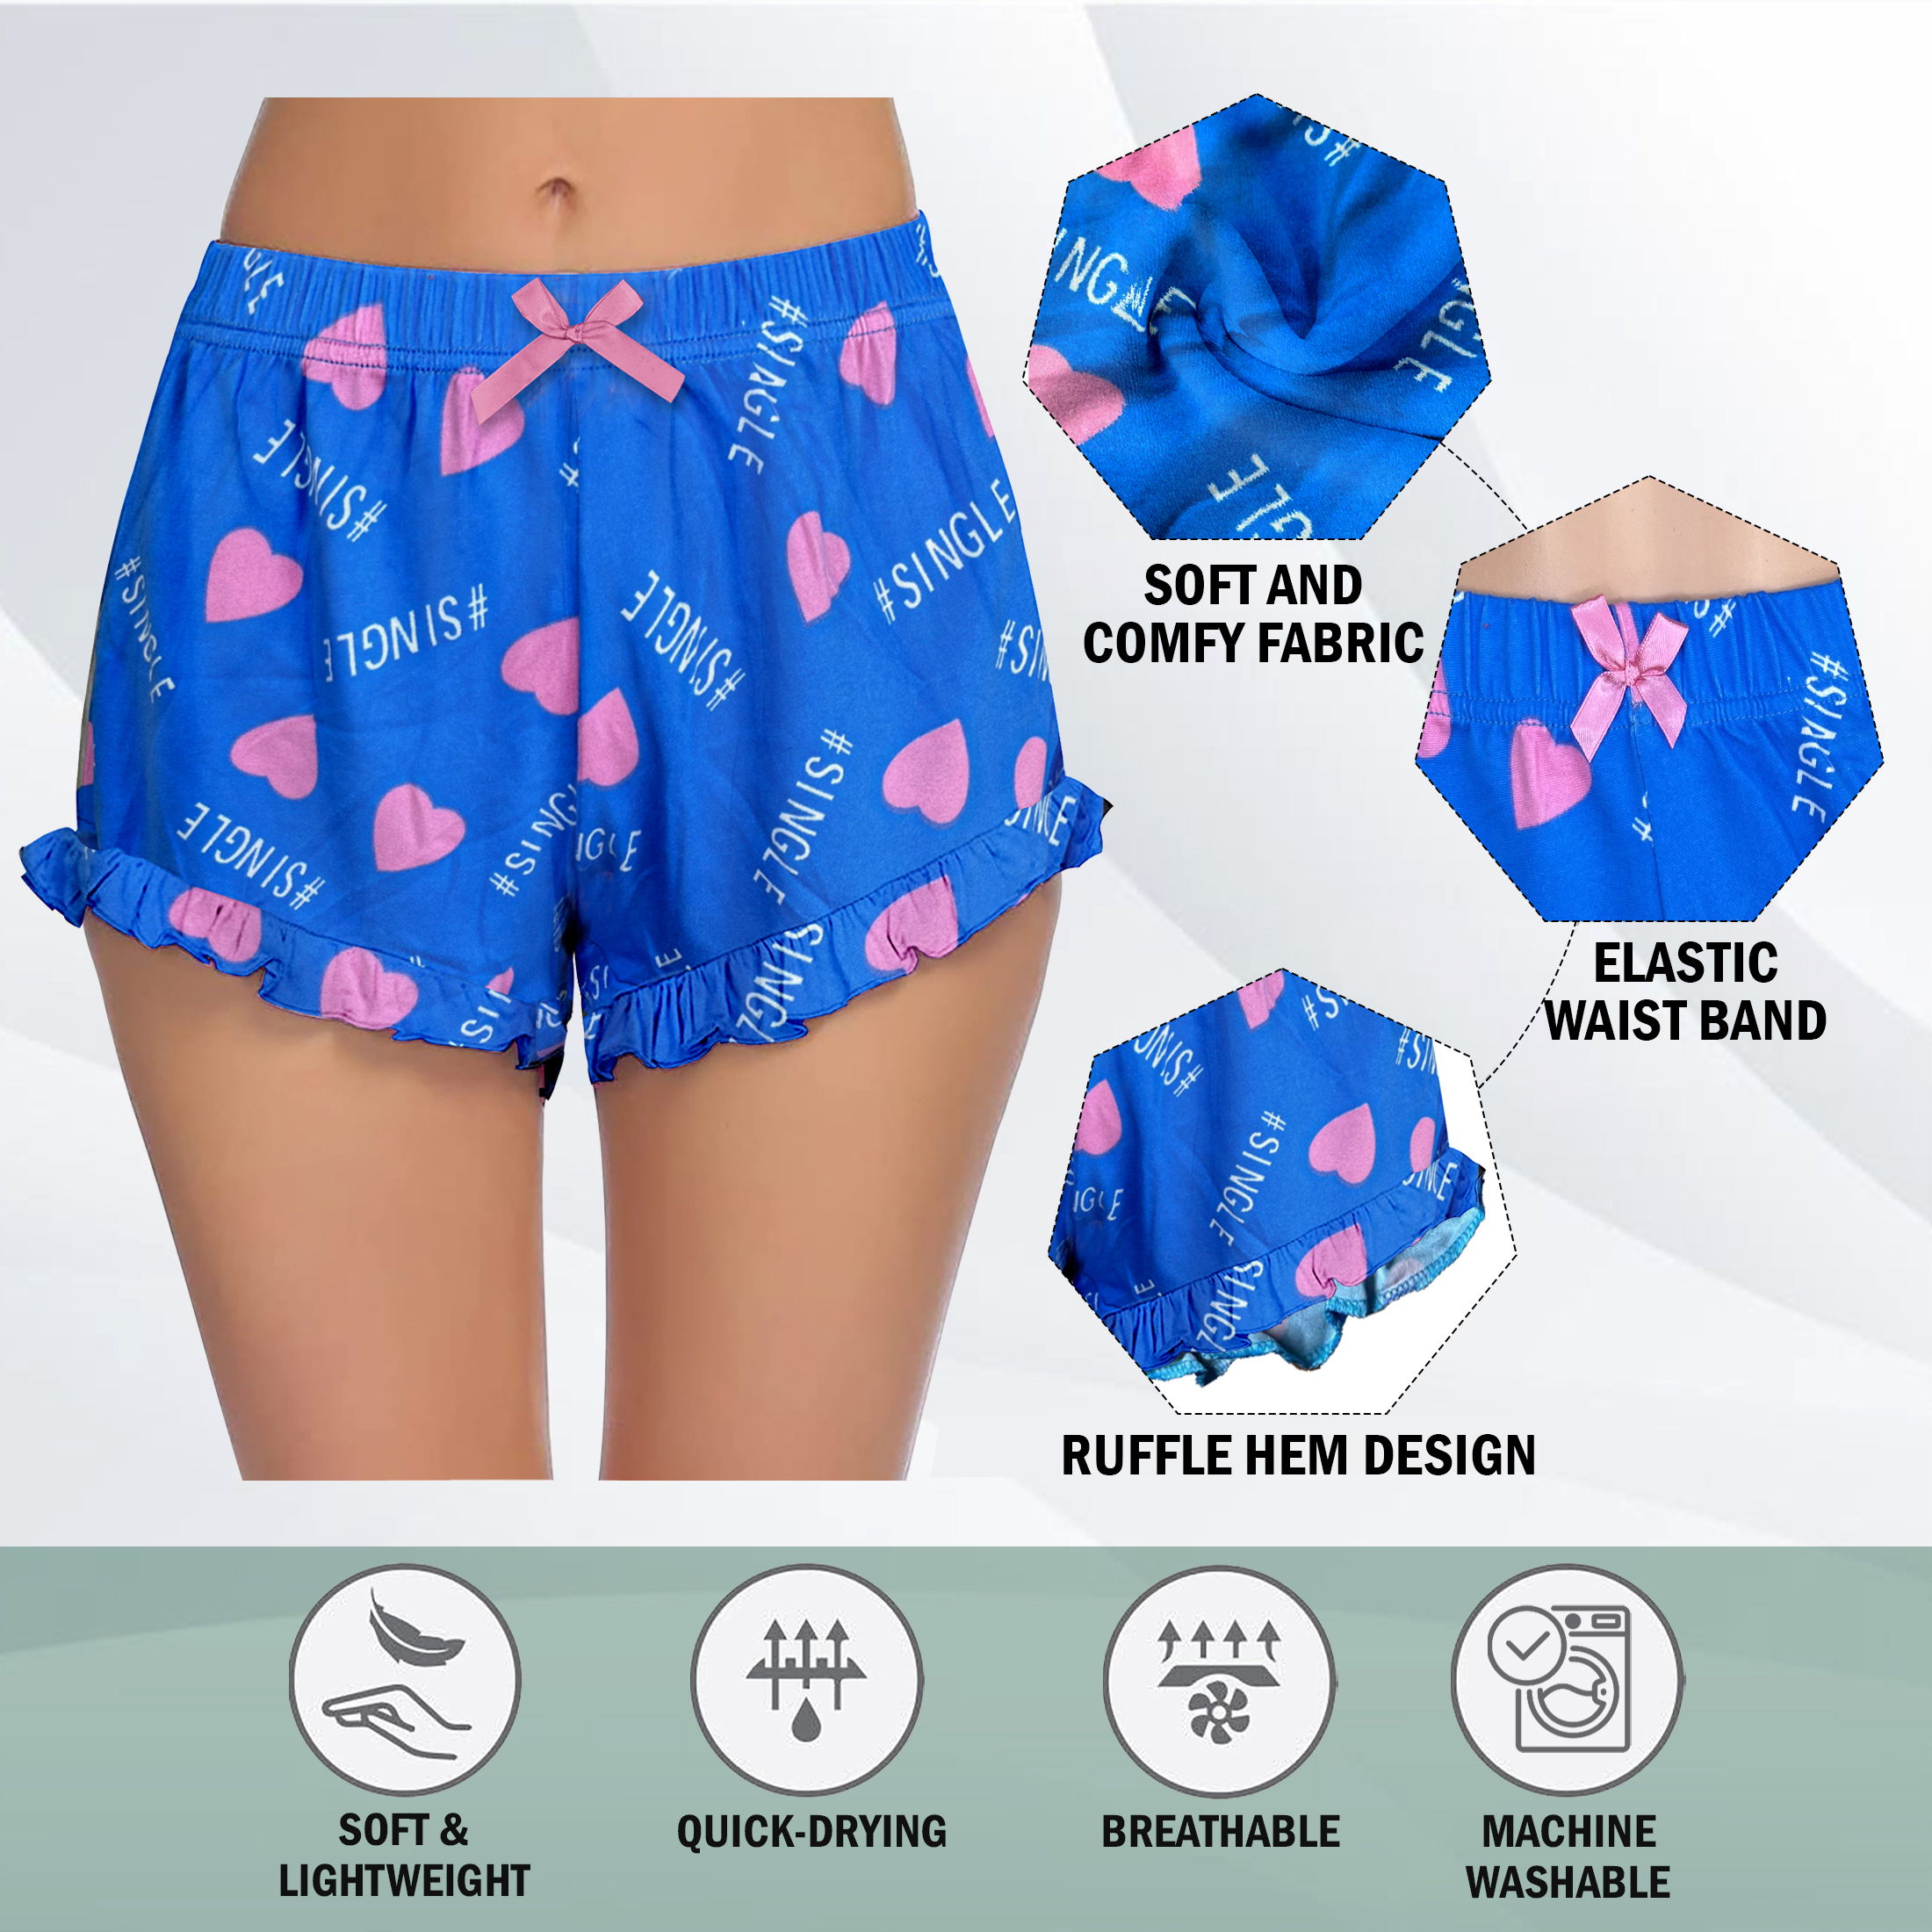 6-Pack Women's Casual Printed Pajama Shorts Soft Stretchy Relaxed Fit Ladies Summer Yoga Bottoms - M